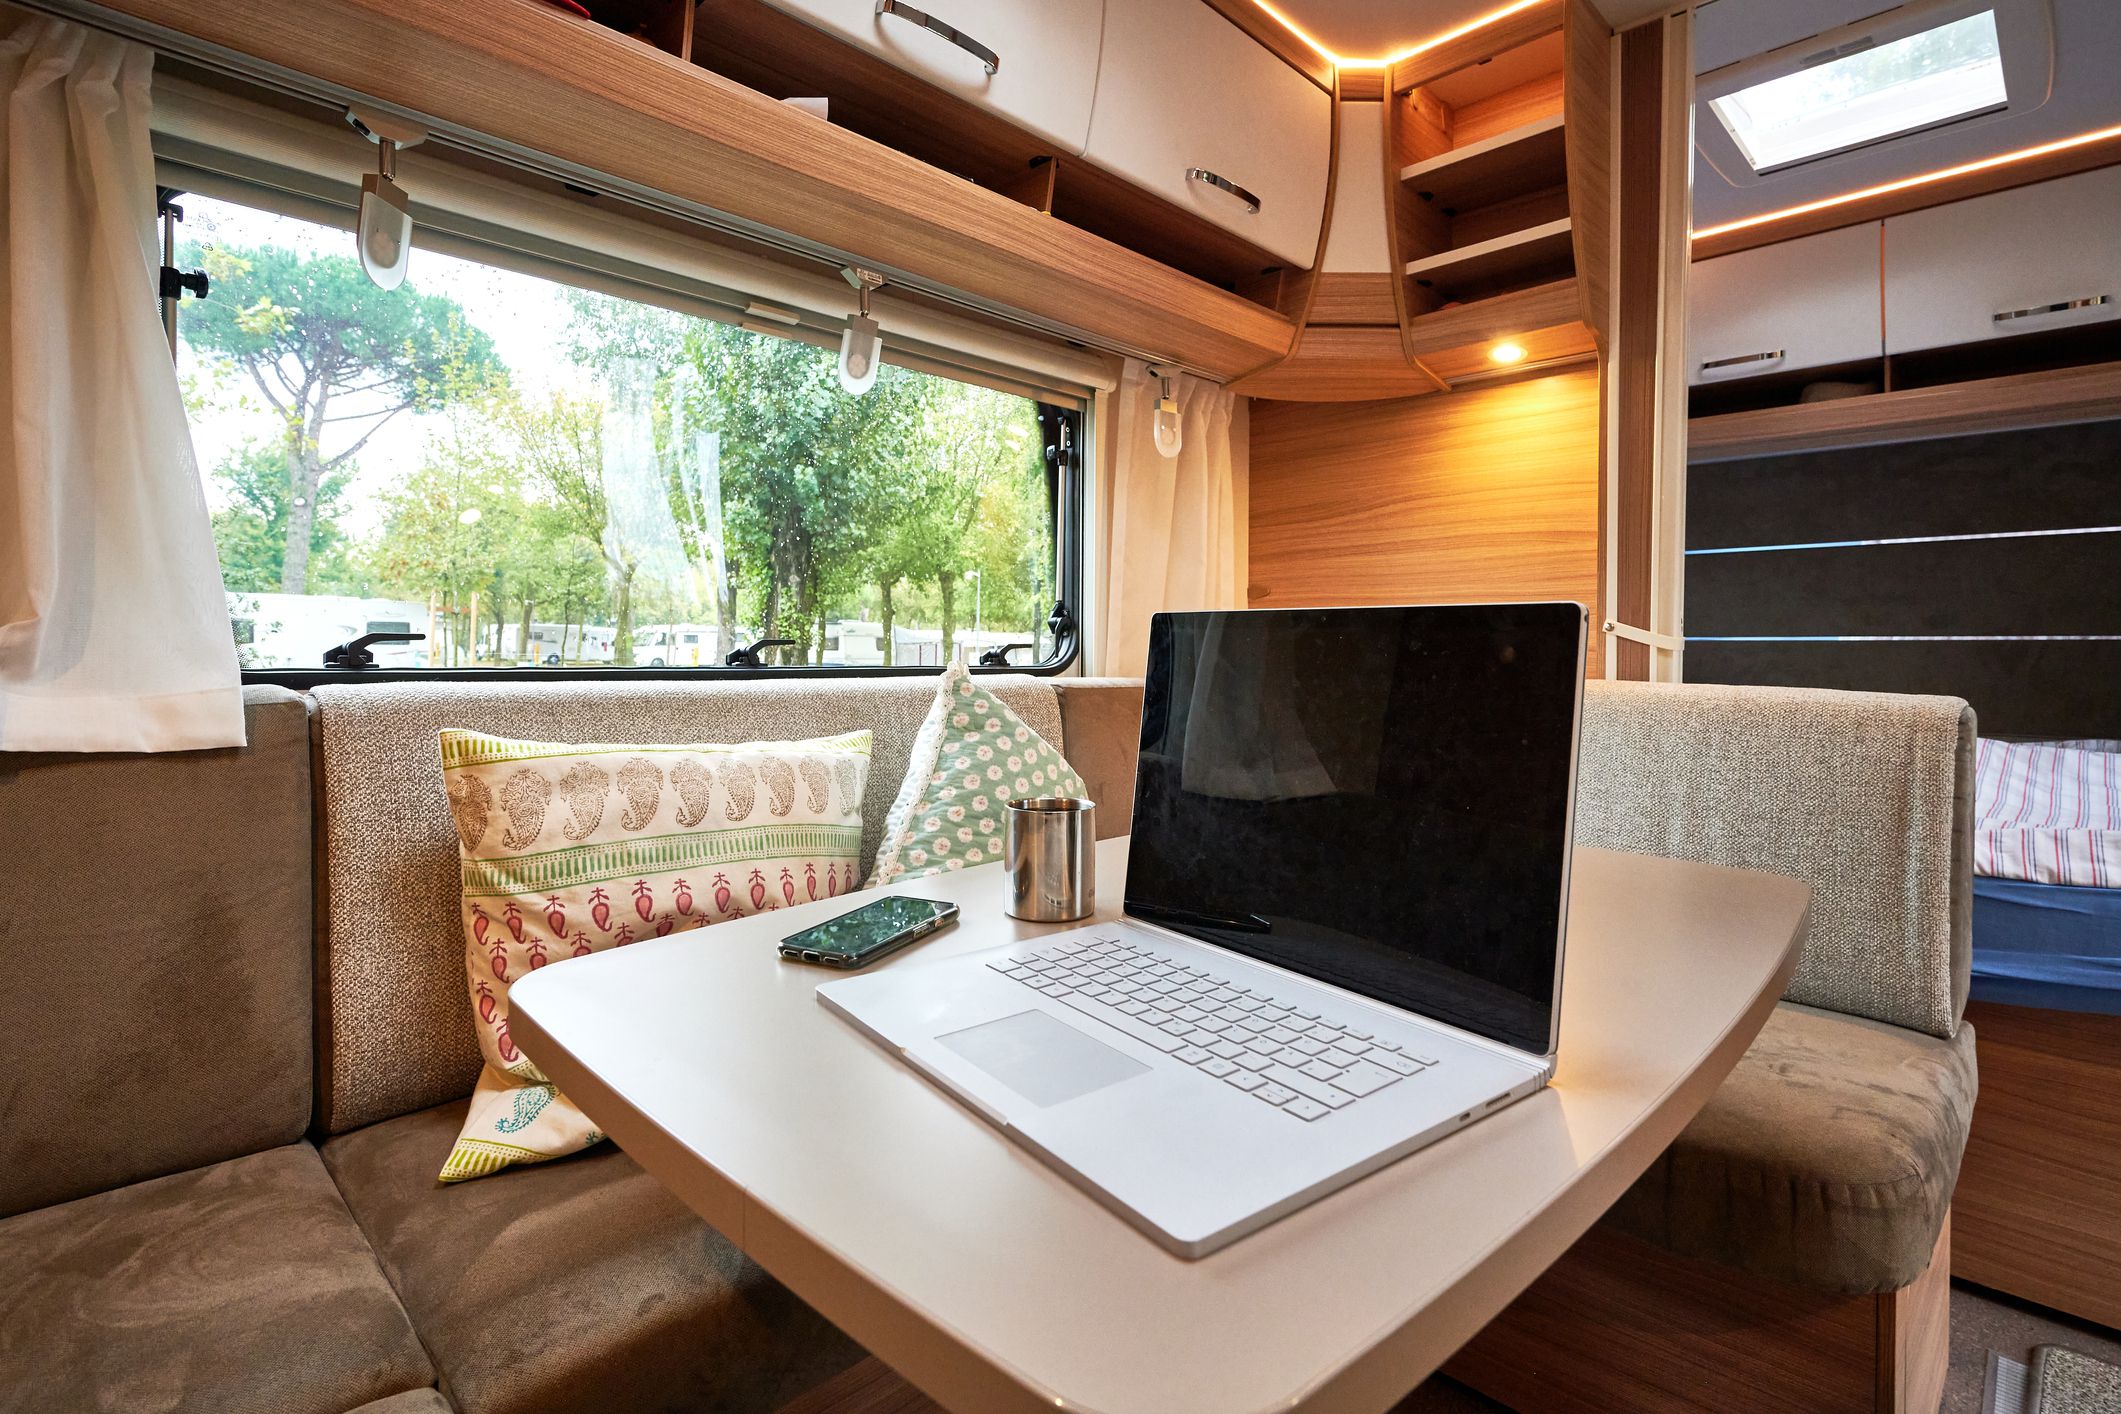 <p>Retiring and traveling the country in an RV is the dream of many as they near retirement. But many aren't waiting. The pandemic caused skyrocketing growth in remote work — and RV wannabes. The demand was so high, the popular <a href="https://www.escapees.com/">Escapees RV Club</a> hosted a virtual conference focused on remote work. More than 3,000 people attended the five-day event. </p><div class="rich-text"><p>This article was originally published on <a href="https://blog.cheapism.com/rv-industry-trends/">Cheapism</a></p></div>